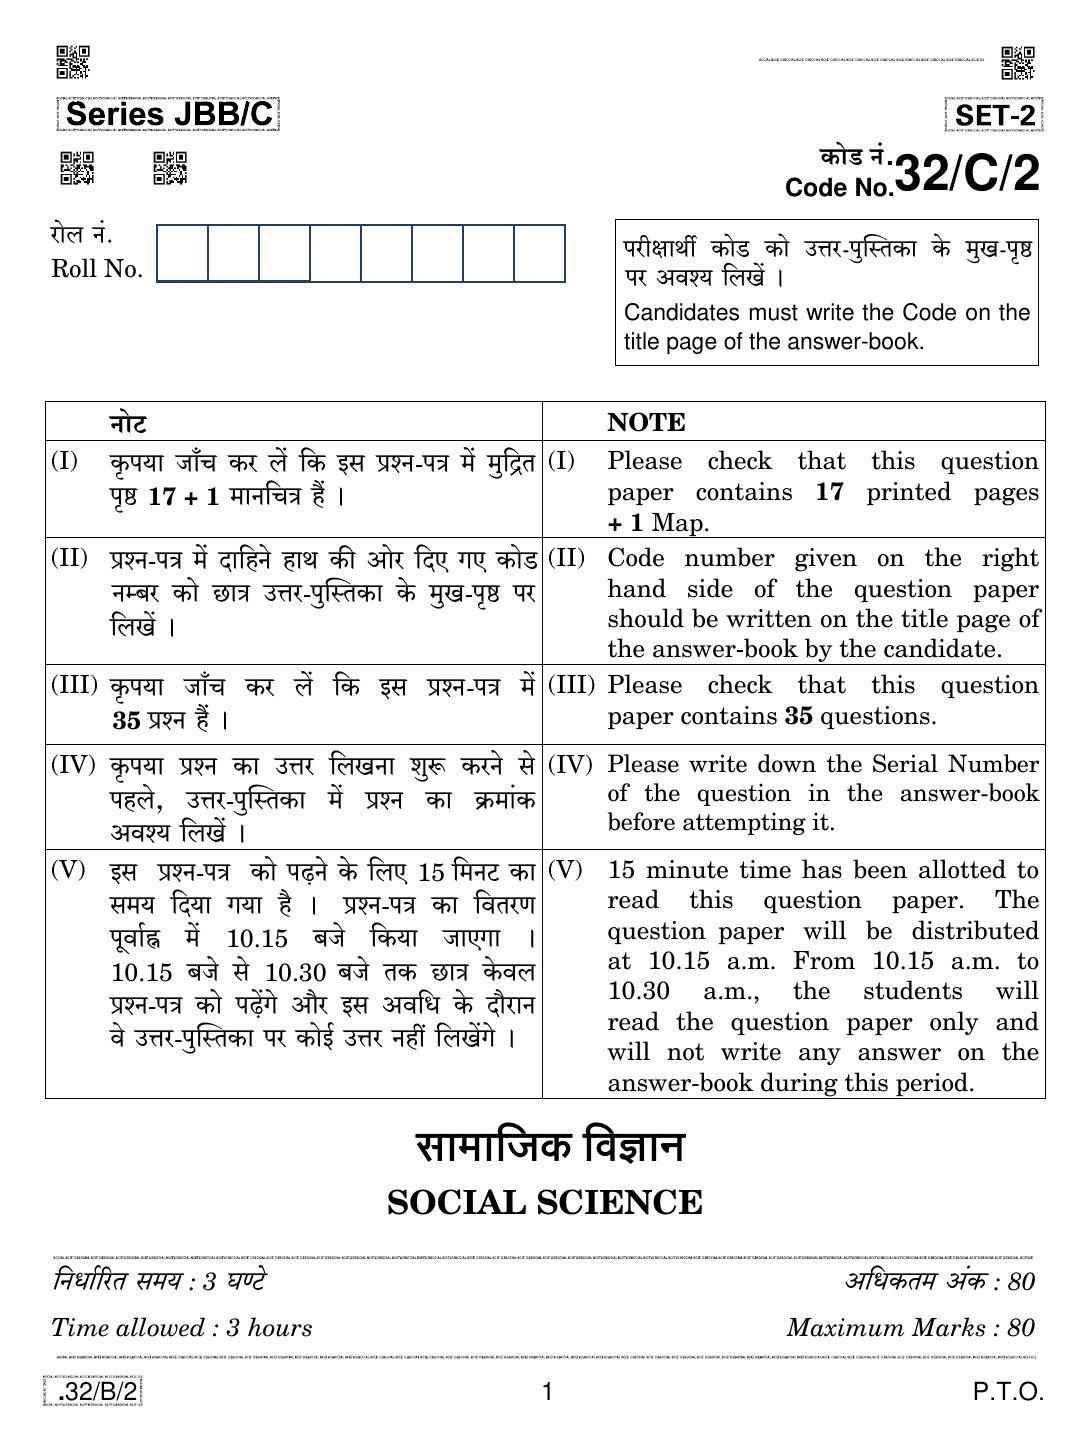 CBSE Class 10 32-C-2 Social Science 2020 Compartment Question Paper - Page 1